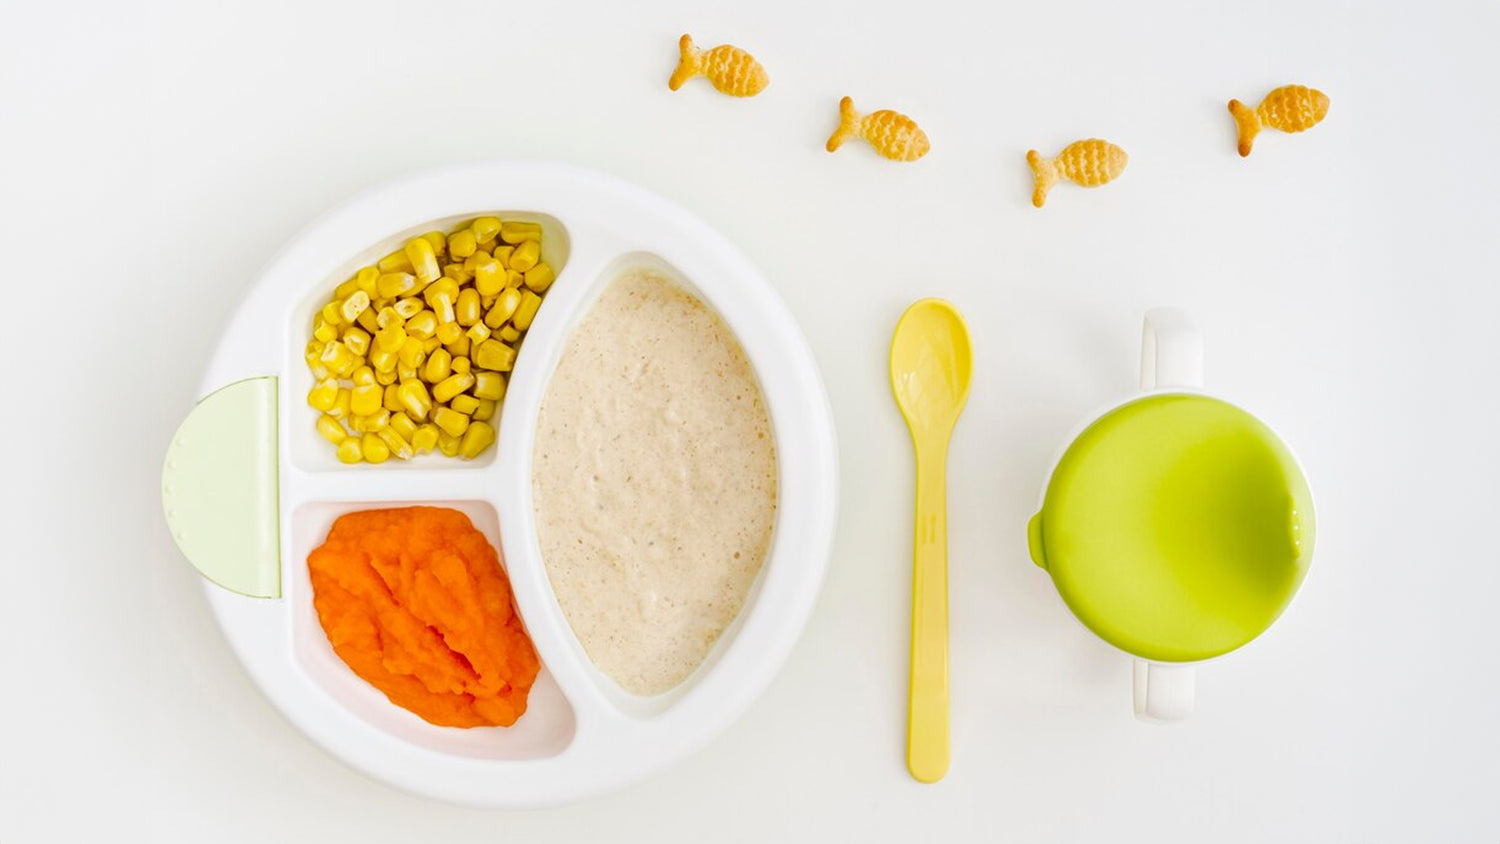 Homemade Baby Food: 2 Simple Recipes for Healthy Meals